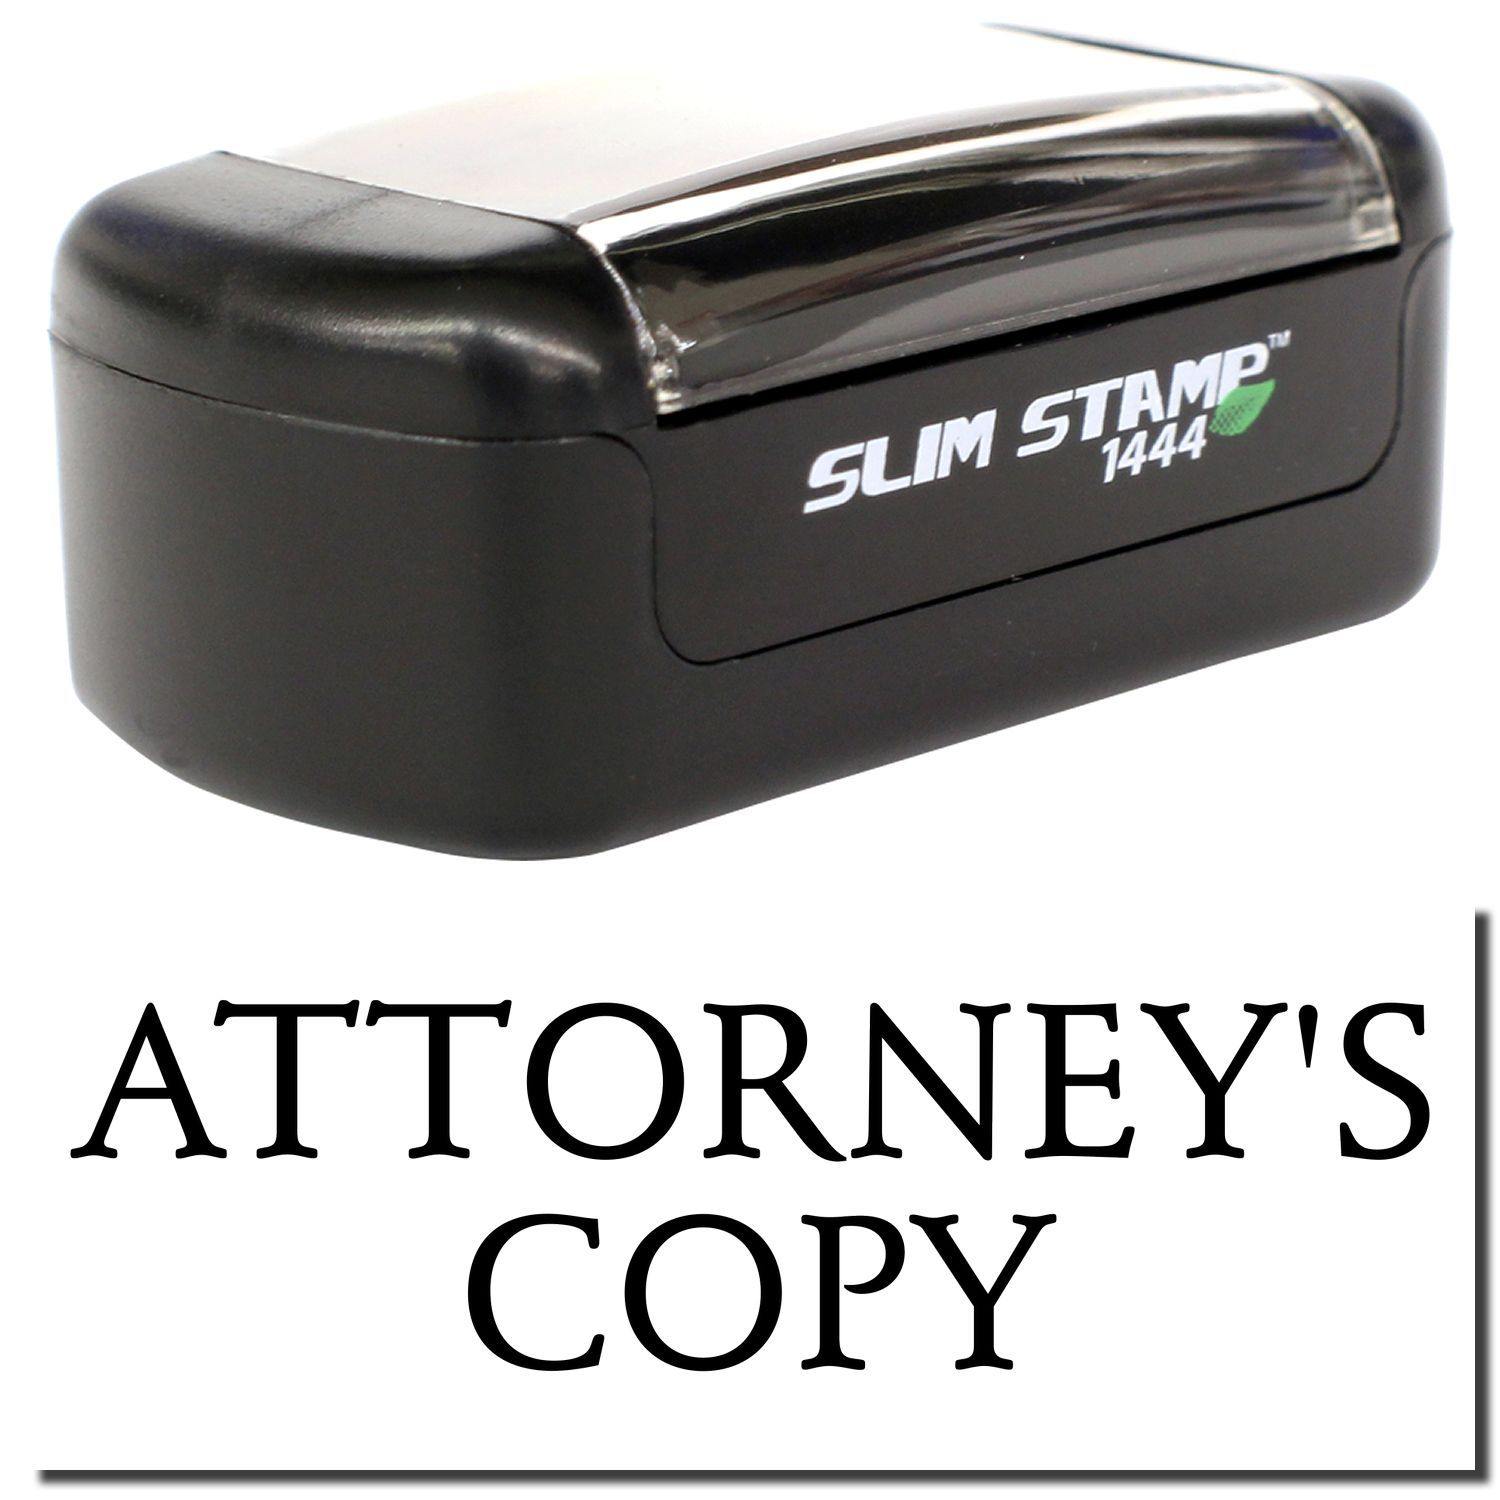 A stock office pre-inked stamp with a stamped image showing how the text "ATTORNEY'S COPY" is displayed after stamping.